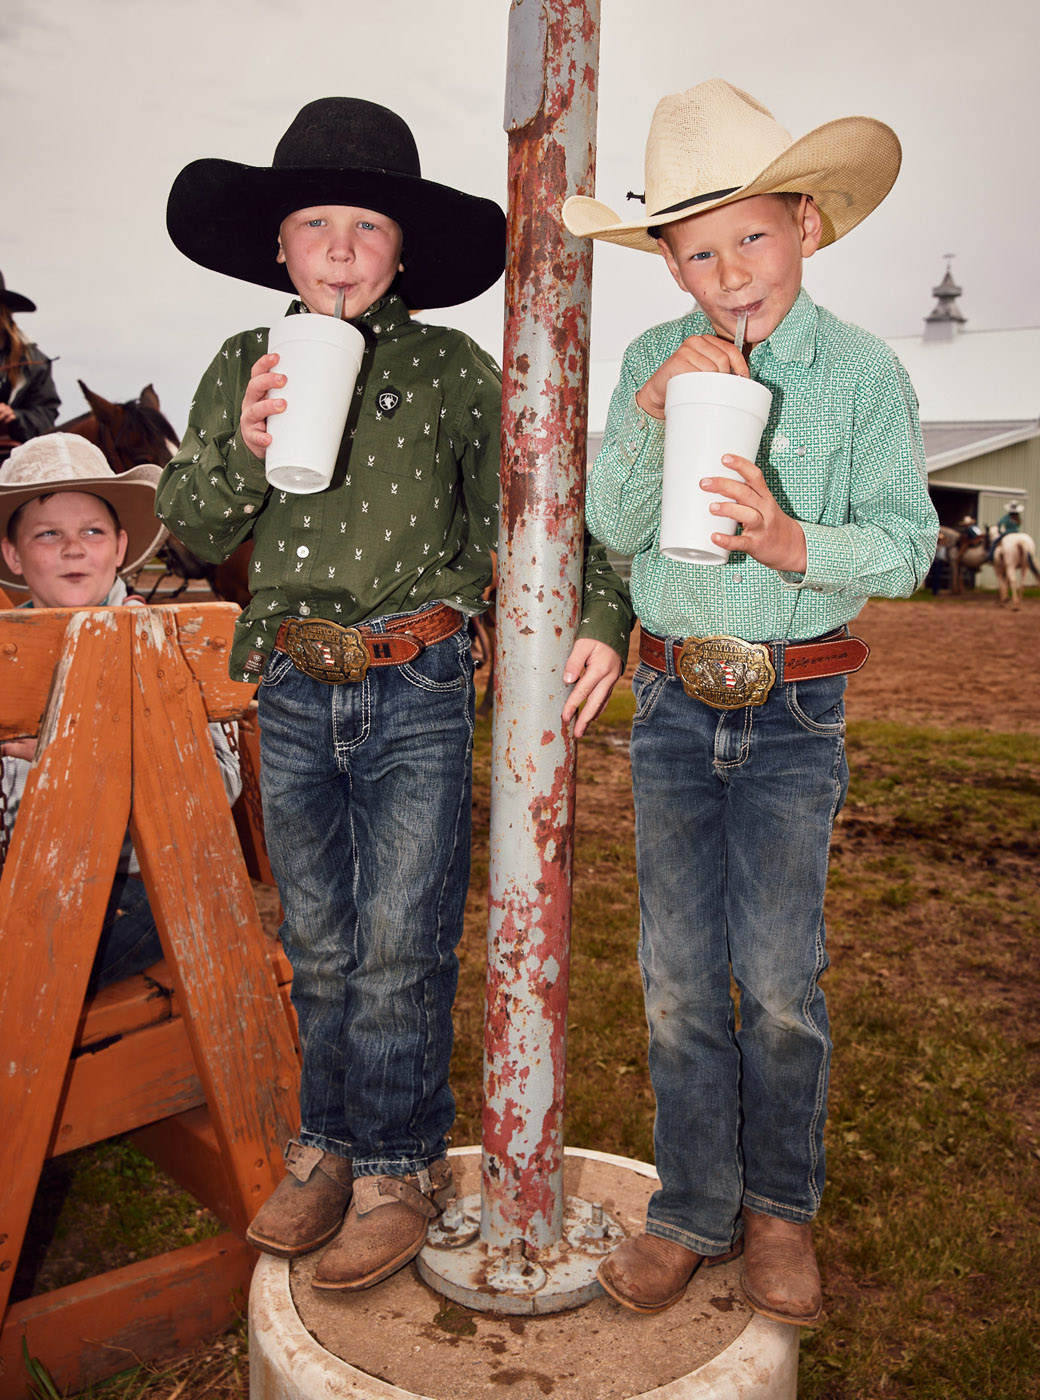 Boys at rodeo sipping soda from foam cups | Childrens photography by Saverio Truglia